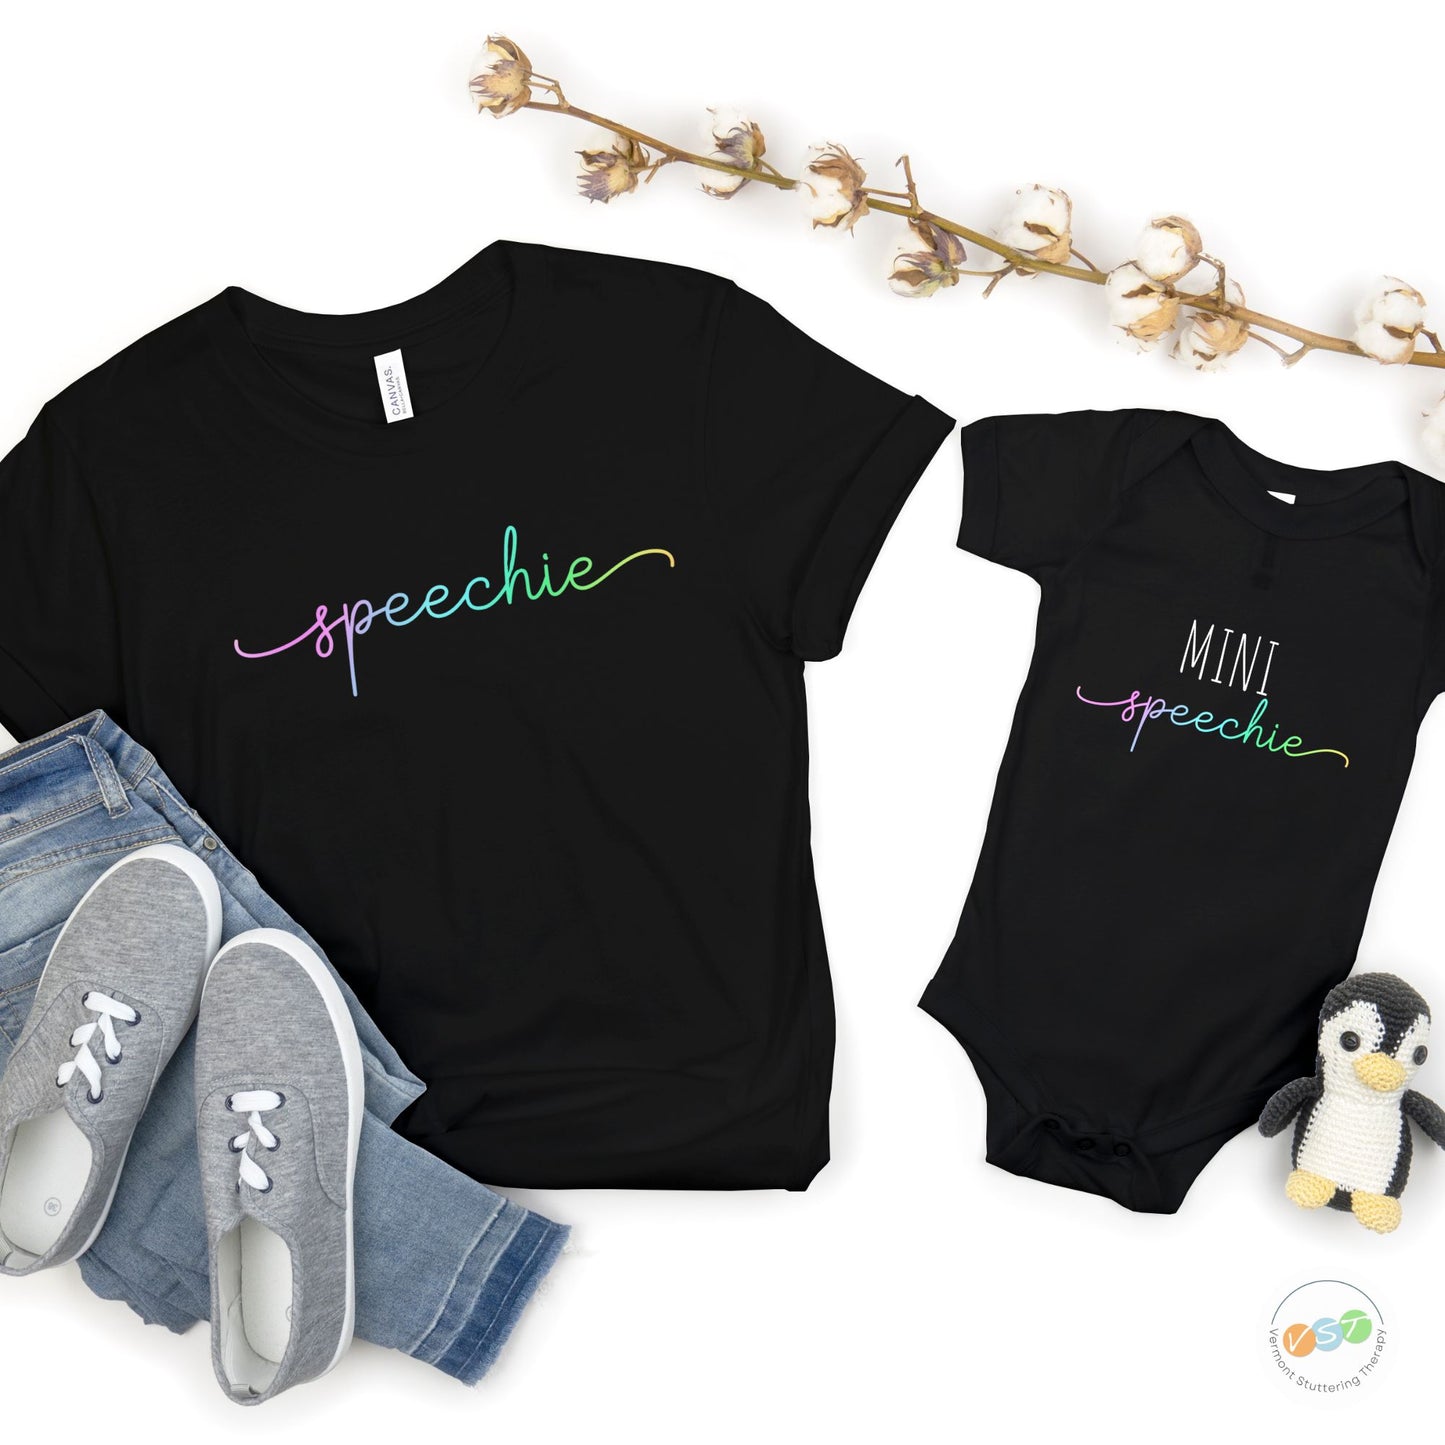 Mommy "Speechie" T-shirt (see link to order matching infant bodysuit separately)